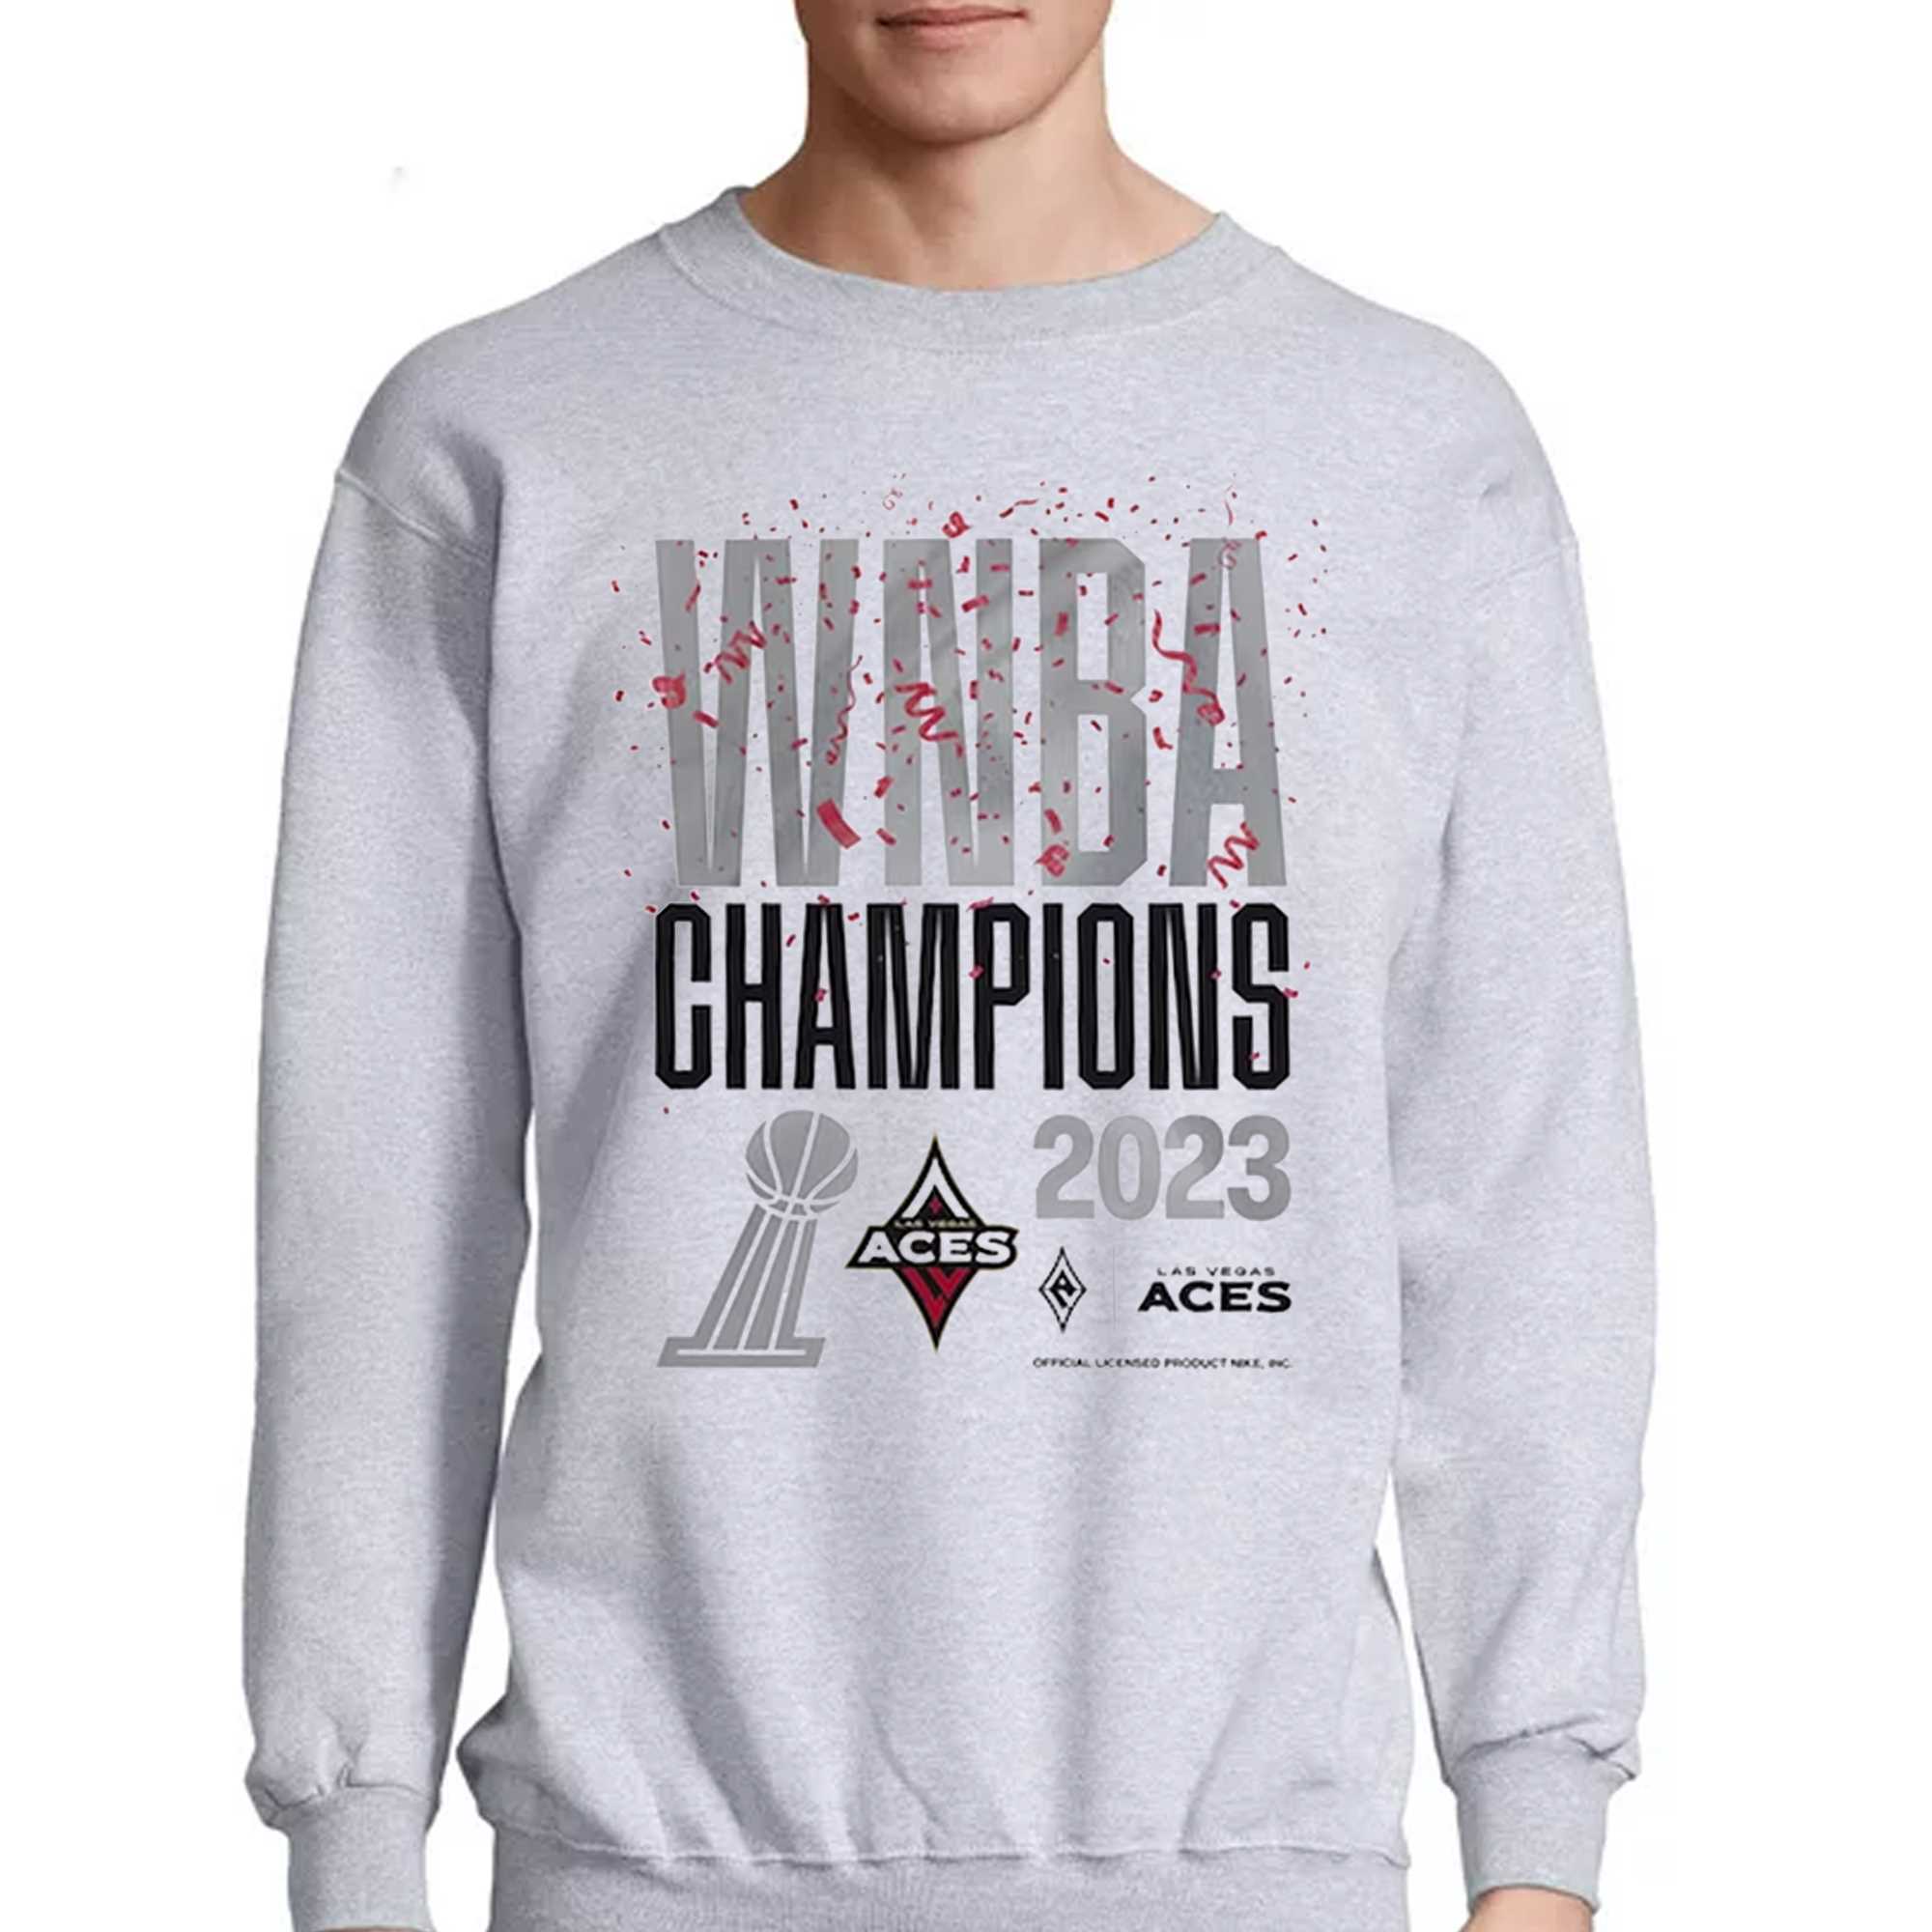 Back-To-Back Las Vegas Aces WNBA Finals Champions Caricatures Hat, hoodie,  sweater, long sleeve and tank top